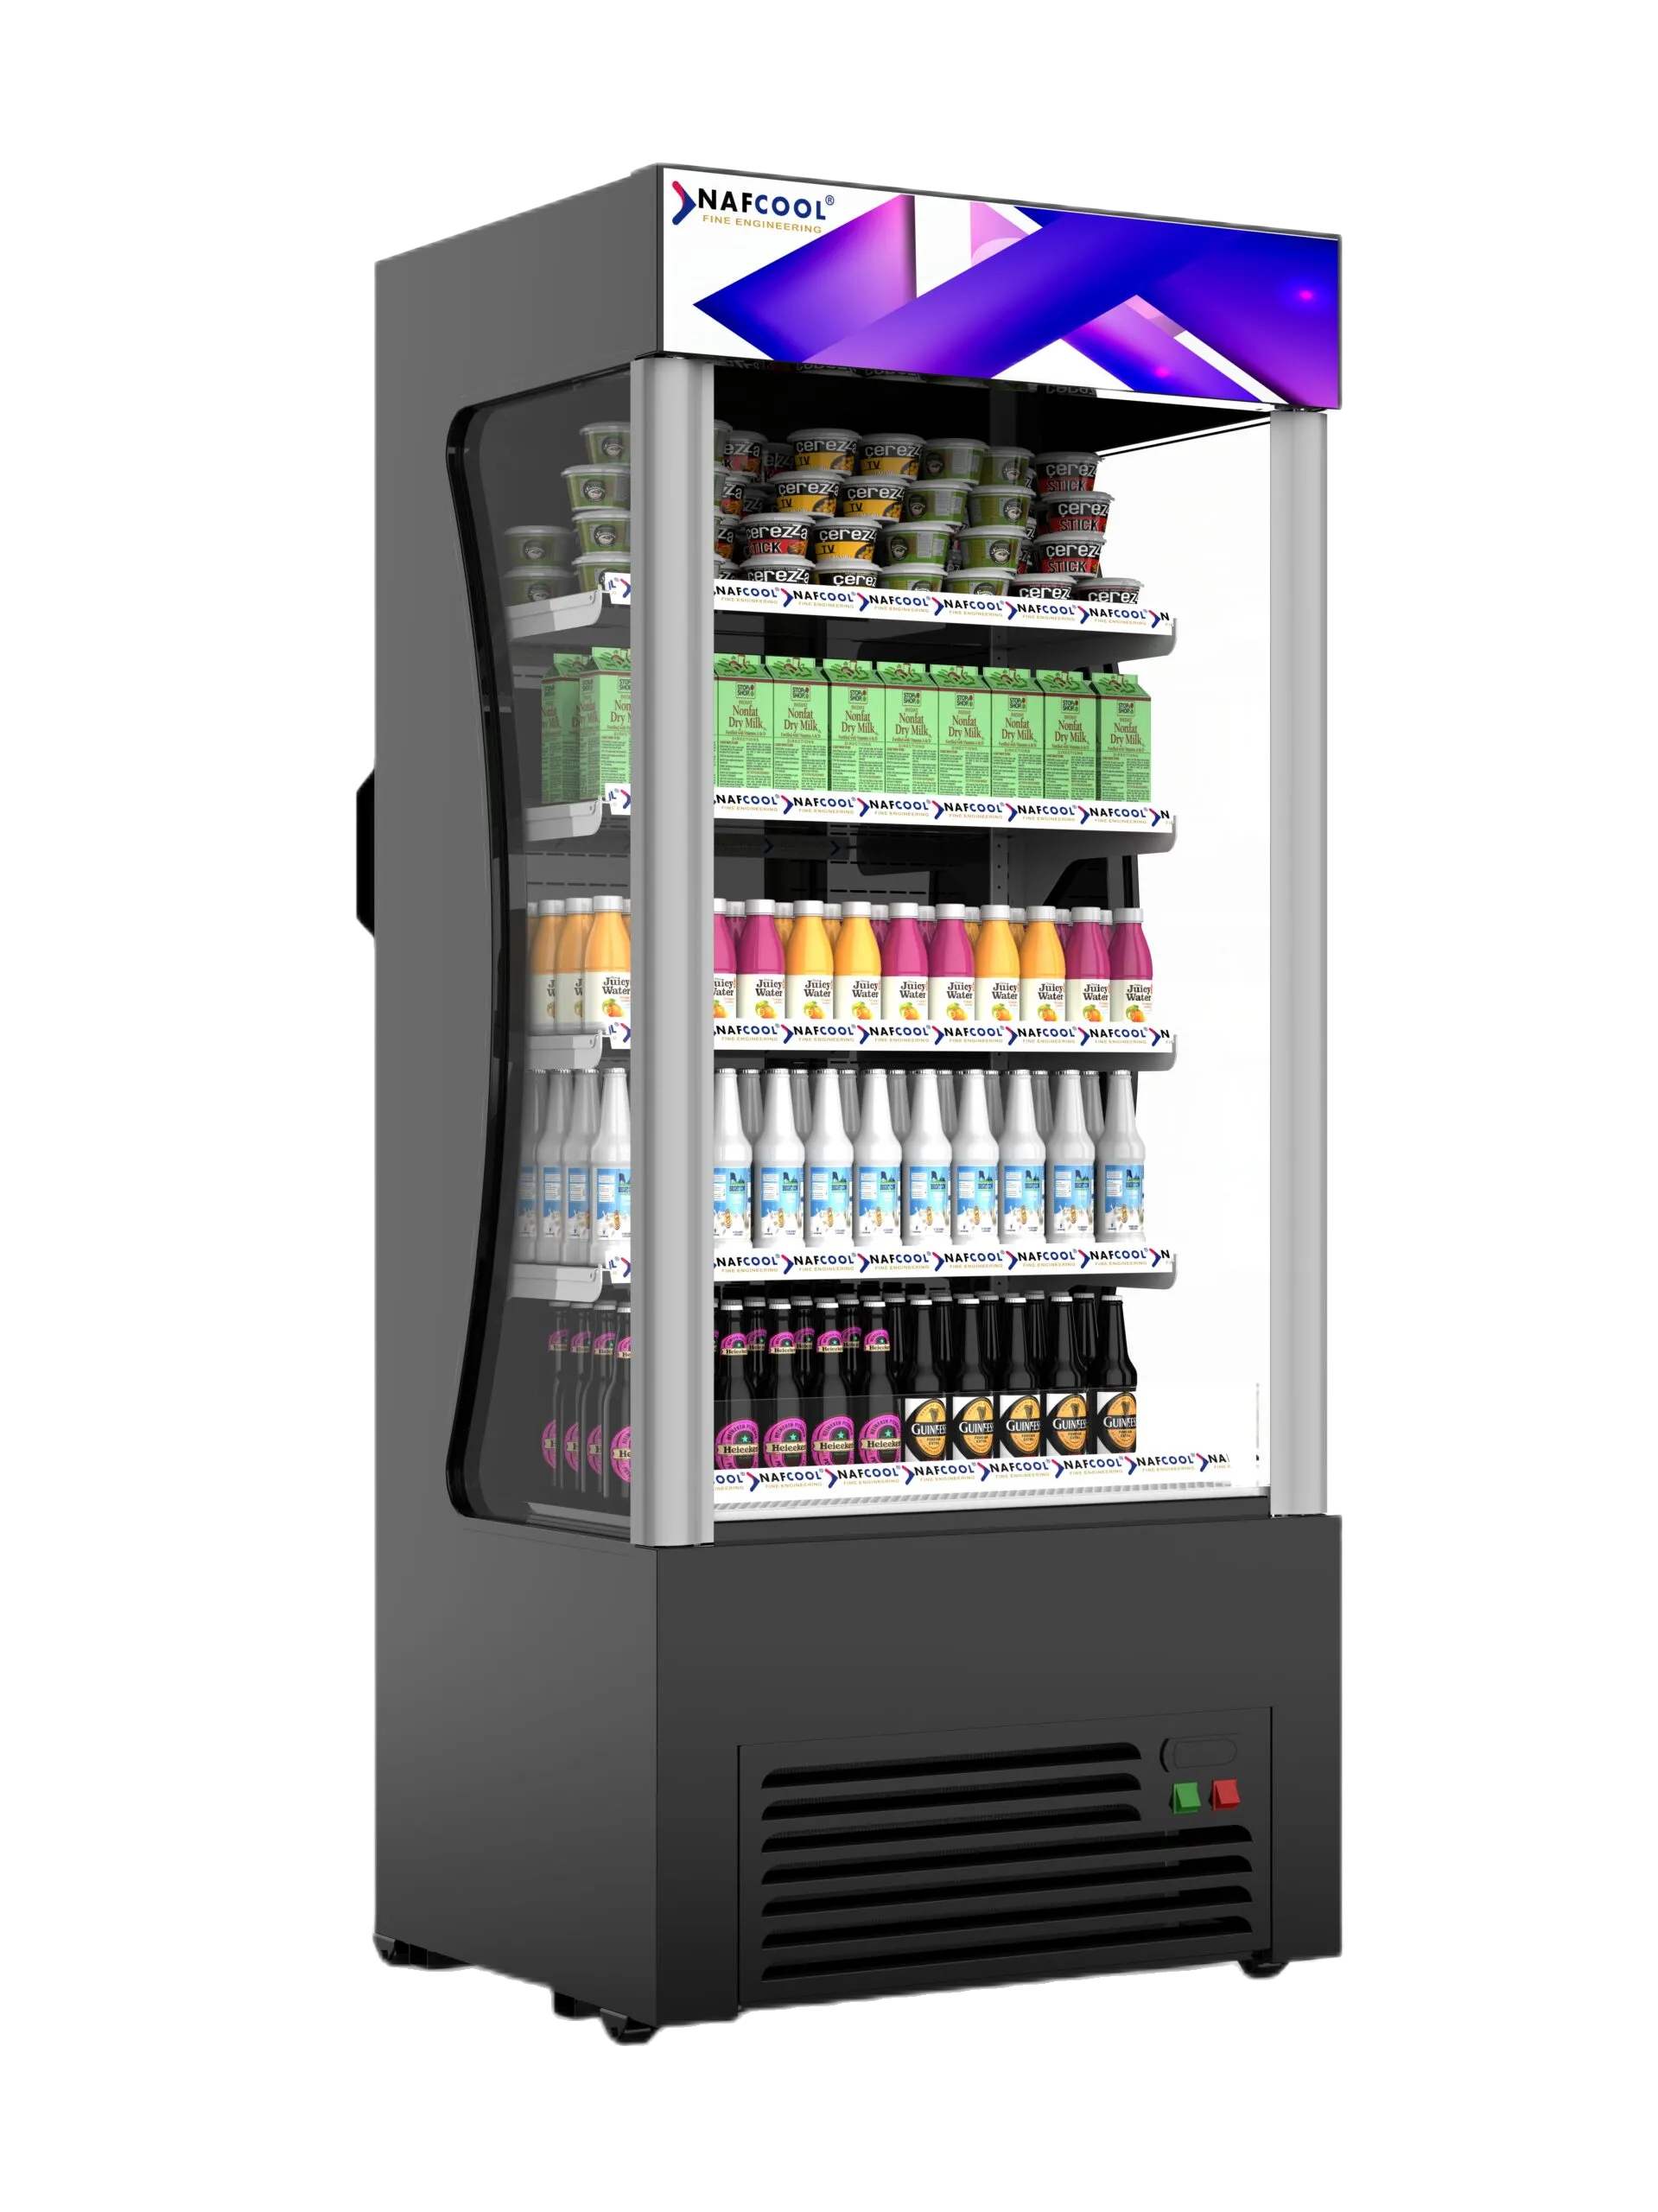 OFC28 Open Front Grab and Go Merchandiser Refrigerator